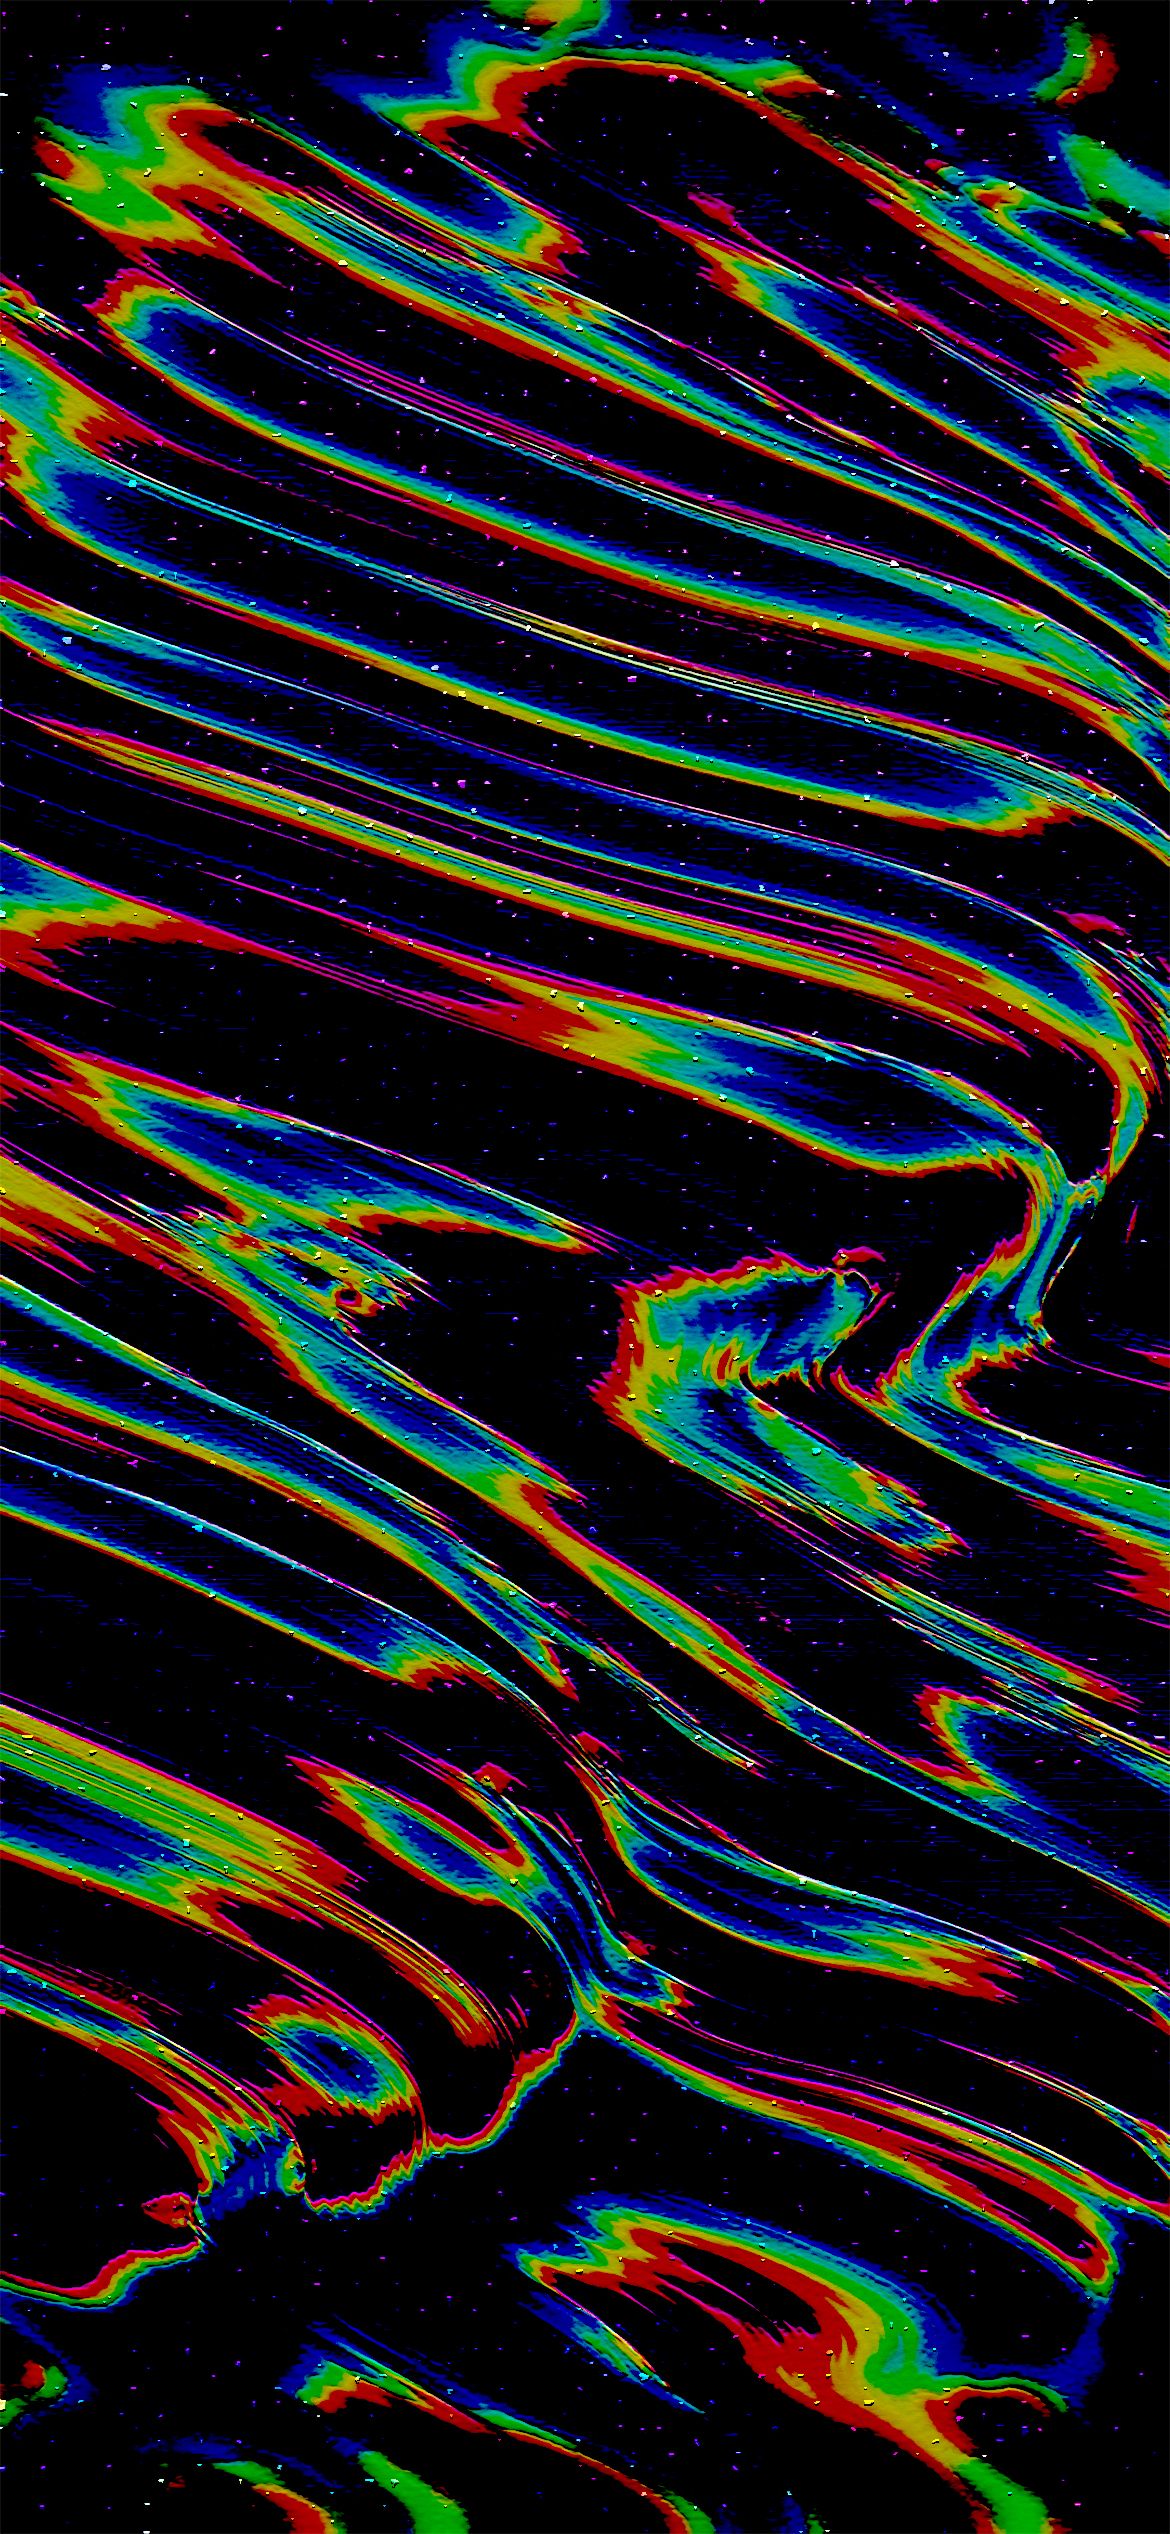 A colorful abstract image of water - Glitch, black glitch